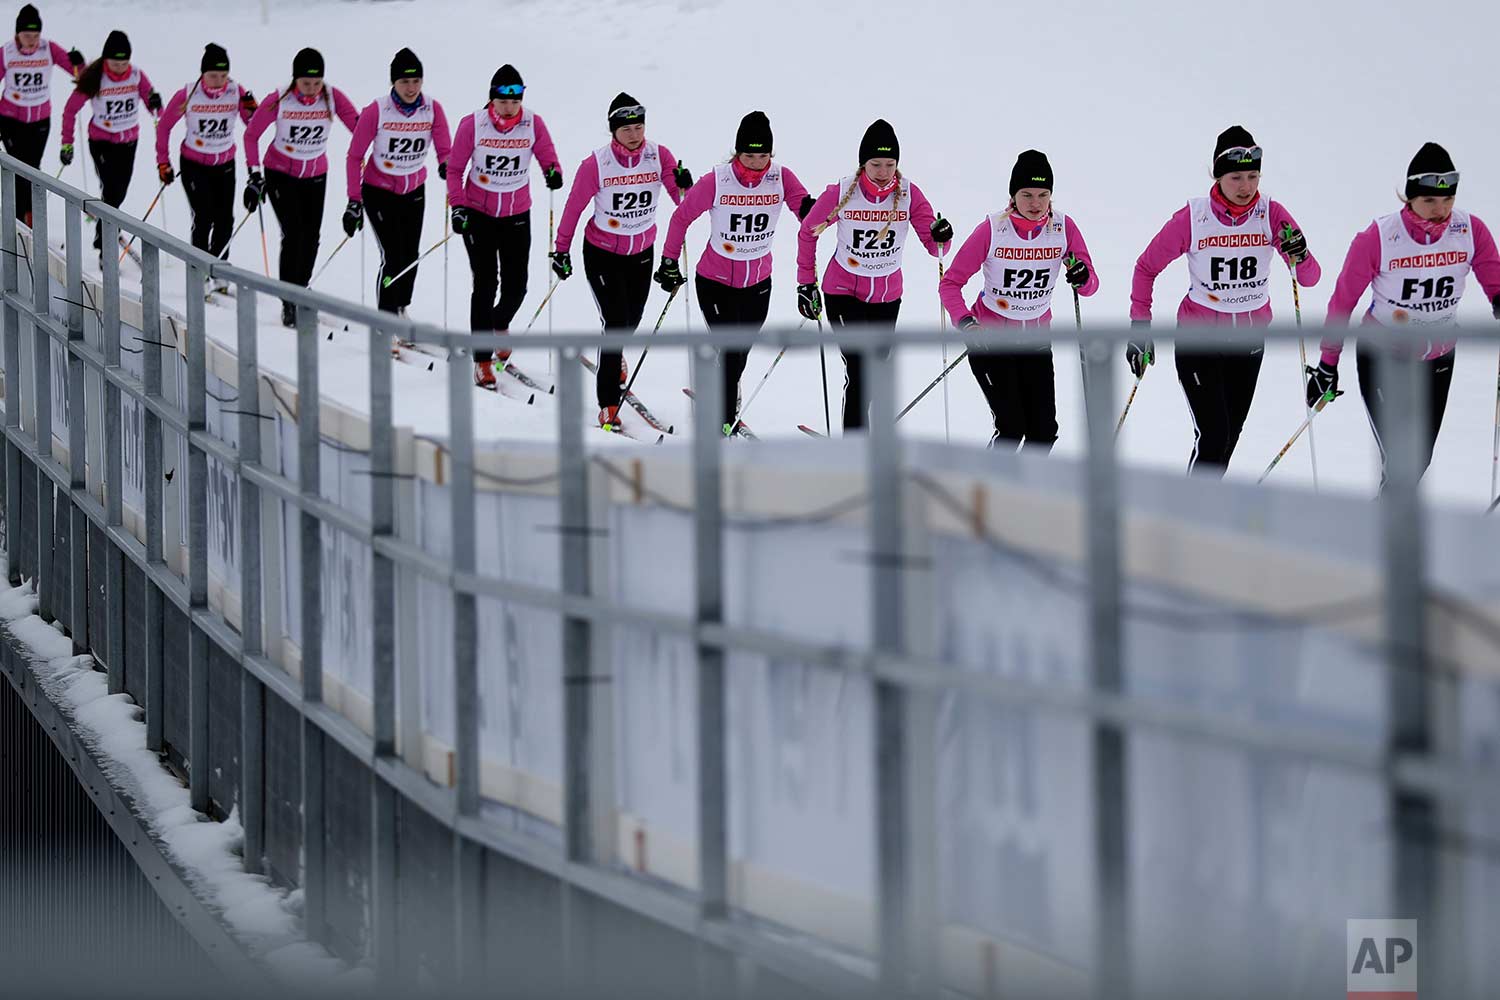  In this Wednesday, Feb. 22, 2017 photo, forerunners prepare the track prior to the women's 5 km cross-country individual classic qualification competition at the 2017 Nordic Skiing World Championships in Lahti, Finland. (AP Photo/Matthias Schrader) 